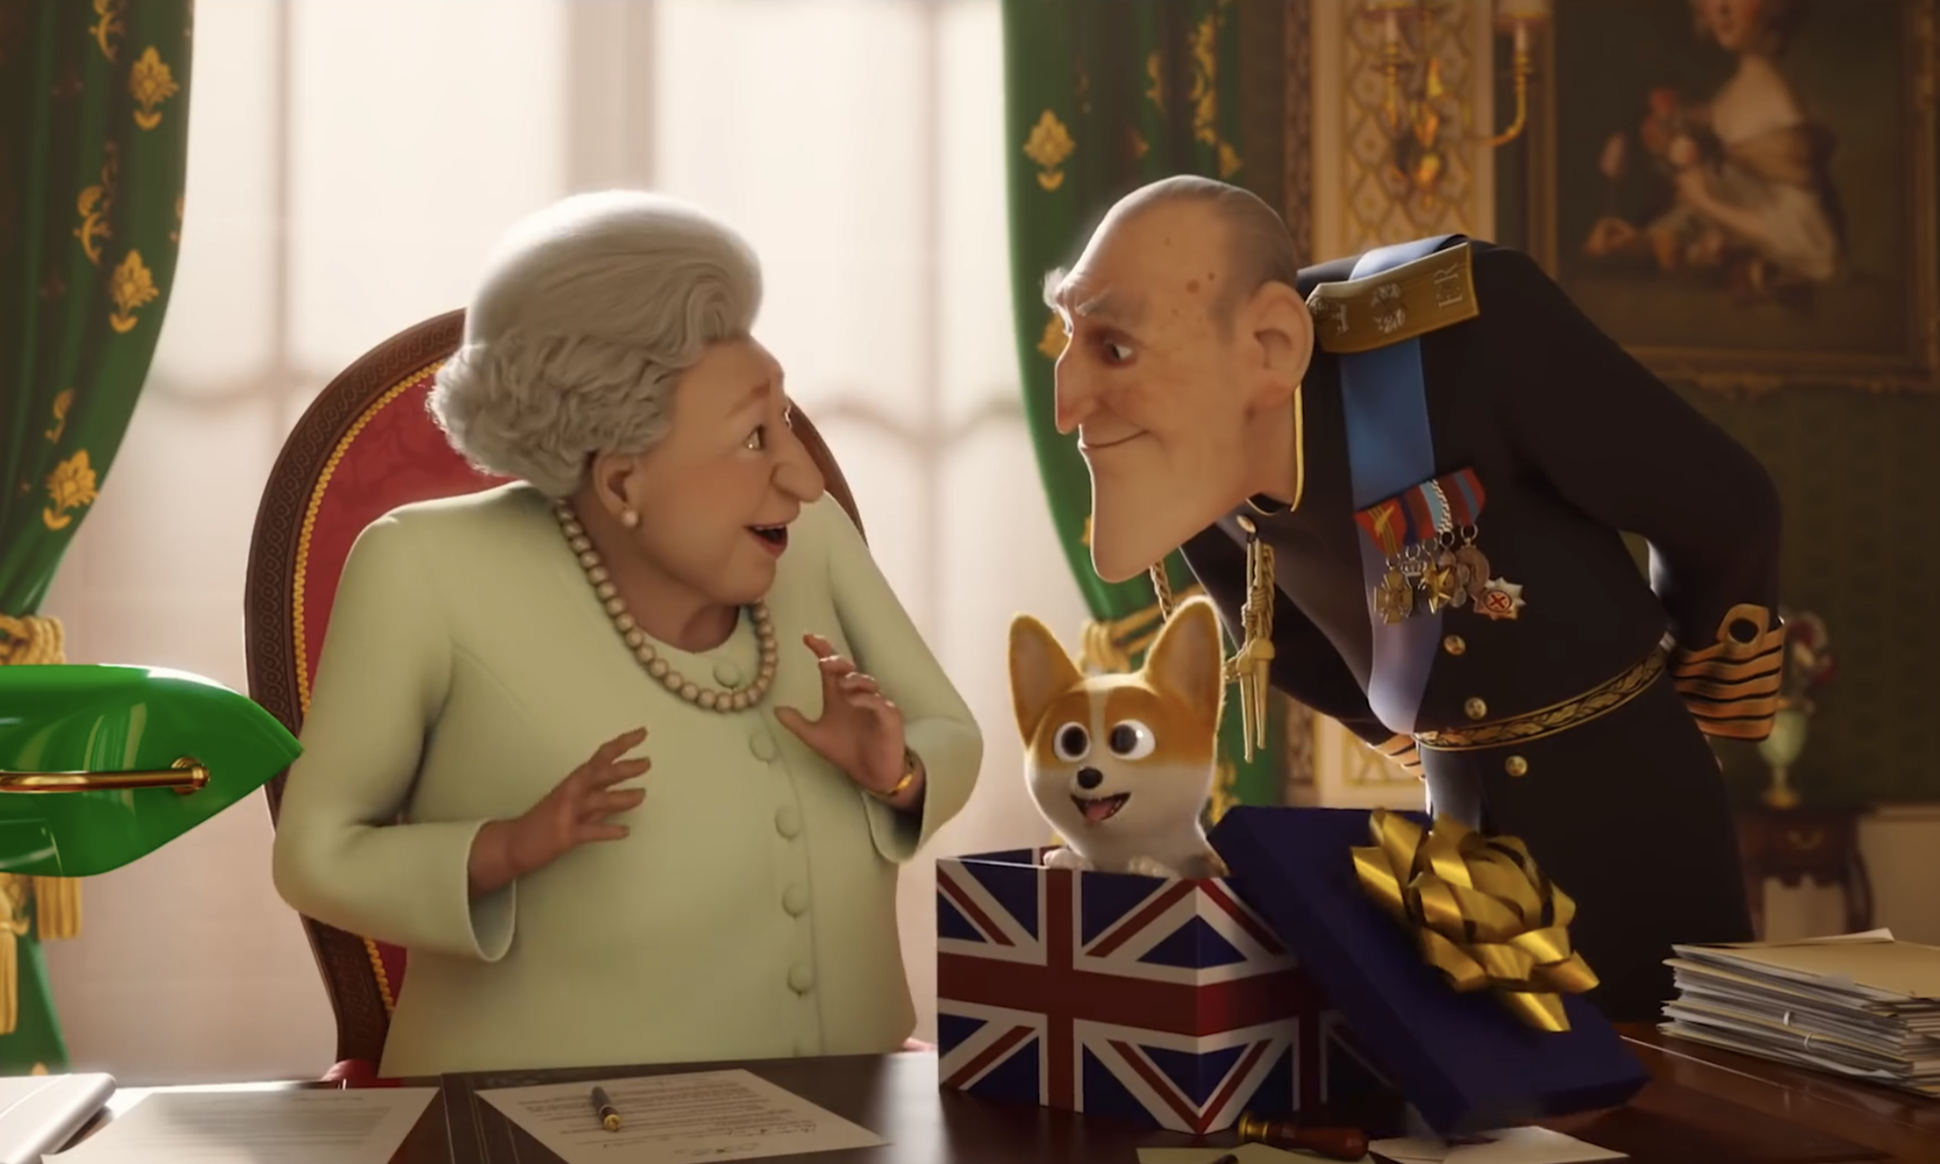 The Queen S Corgi Is A New Animated Film Based On Queen Elizabeth S Dogs,Good Red Color Combinations